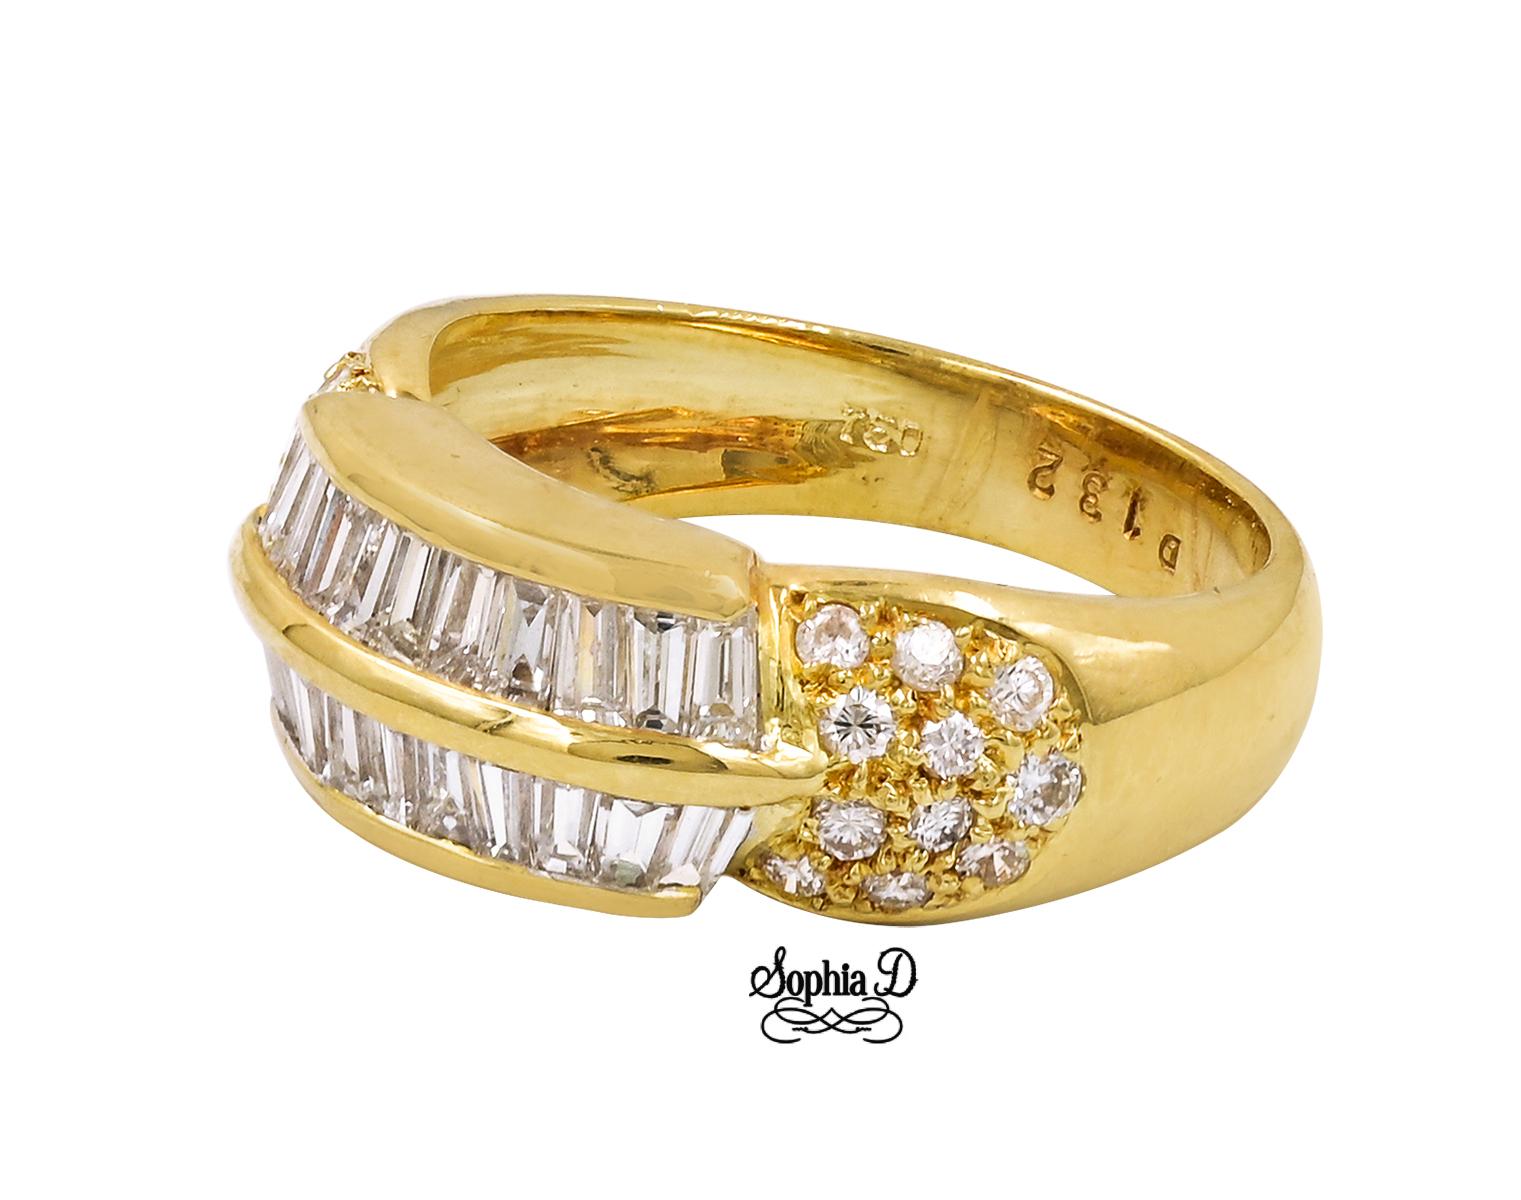 18K yellow gold ring with emerald cut diamonds and round cut diamonds.

Sophia D by Joseph Dardashti LTD has been known worldwide for 35 years and are inspired by classic Art Deco design that merges with modern manufacturing techniques.  